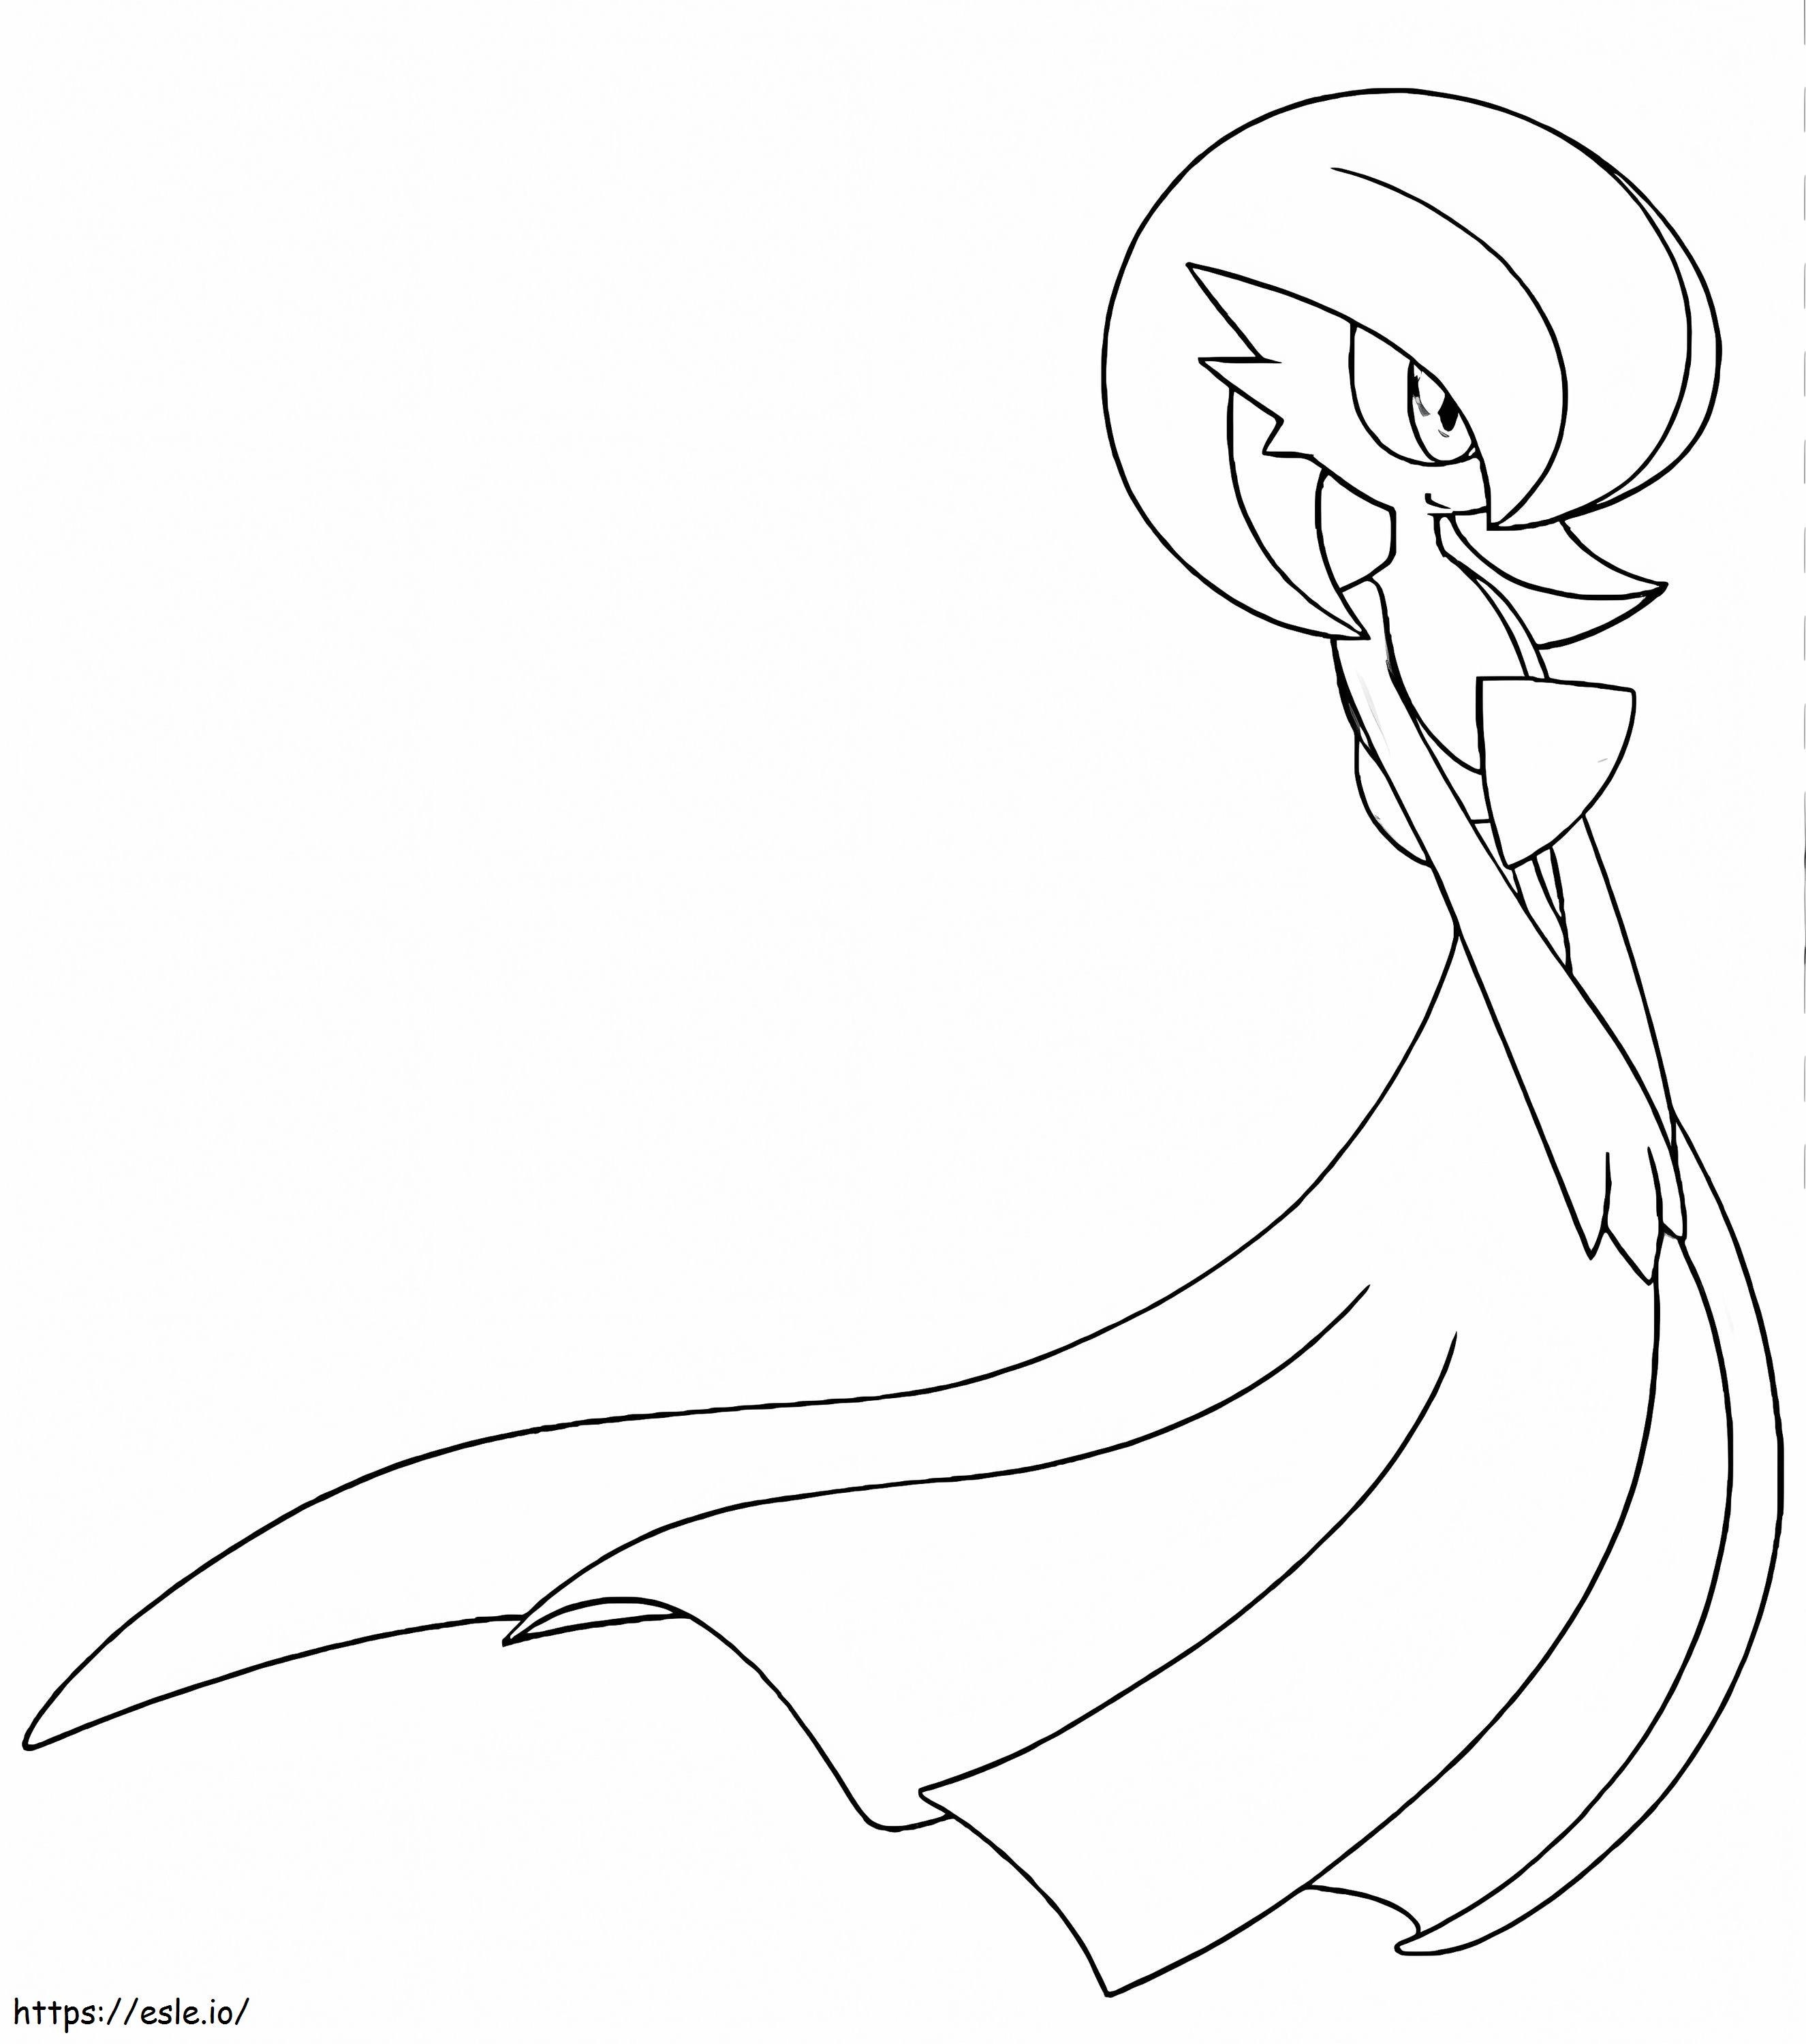 Lovely gardevoir coloring page